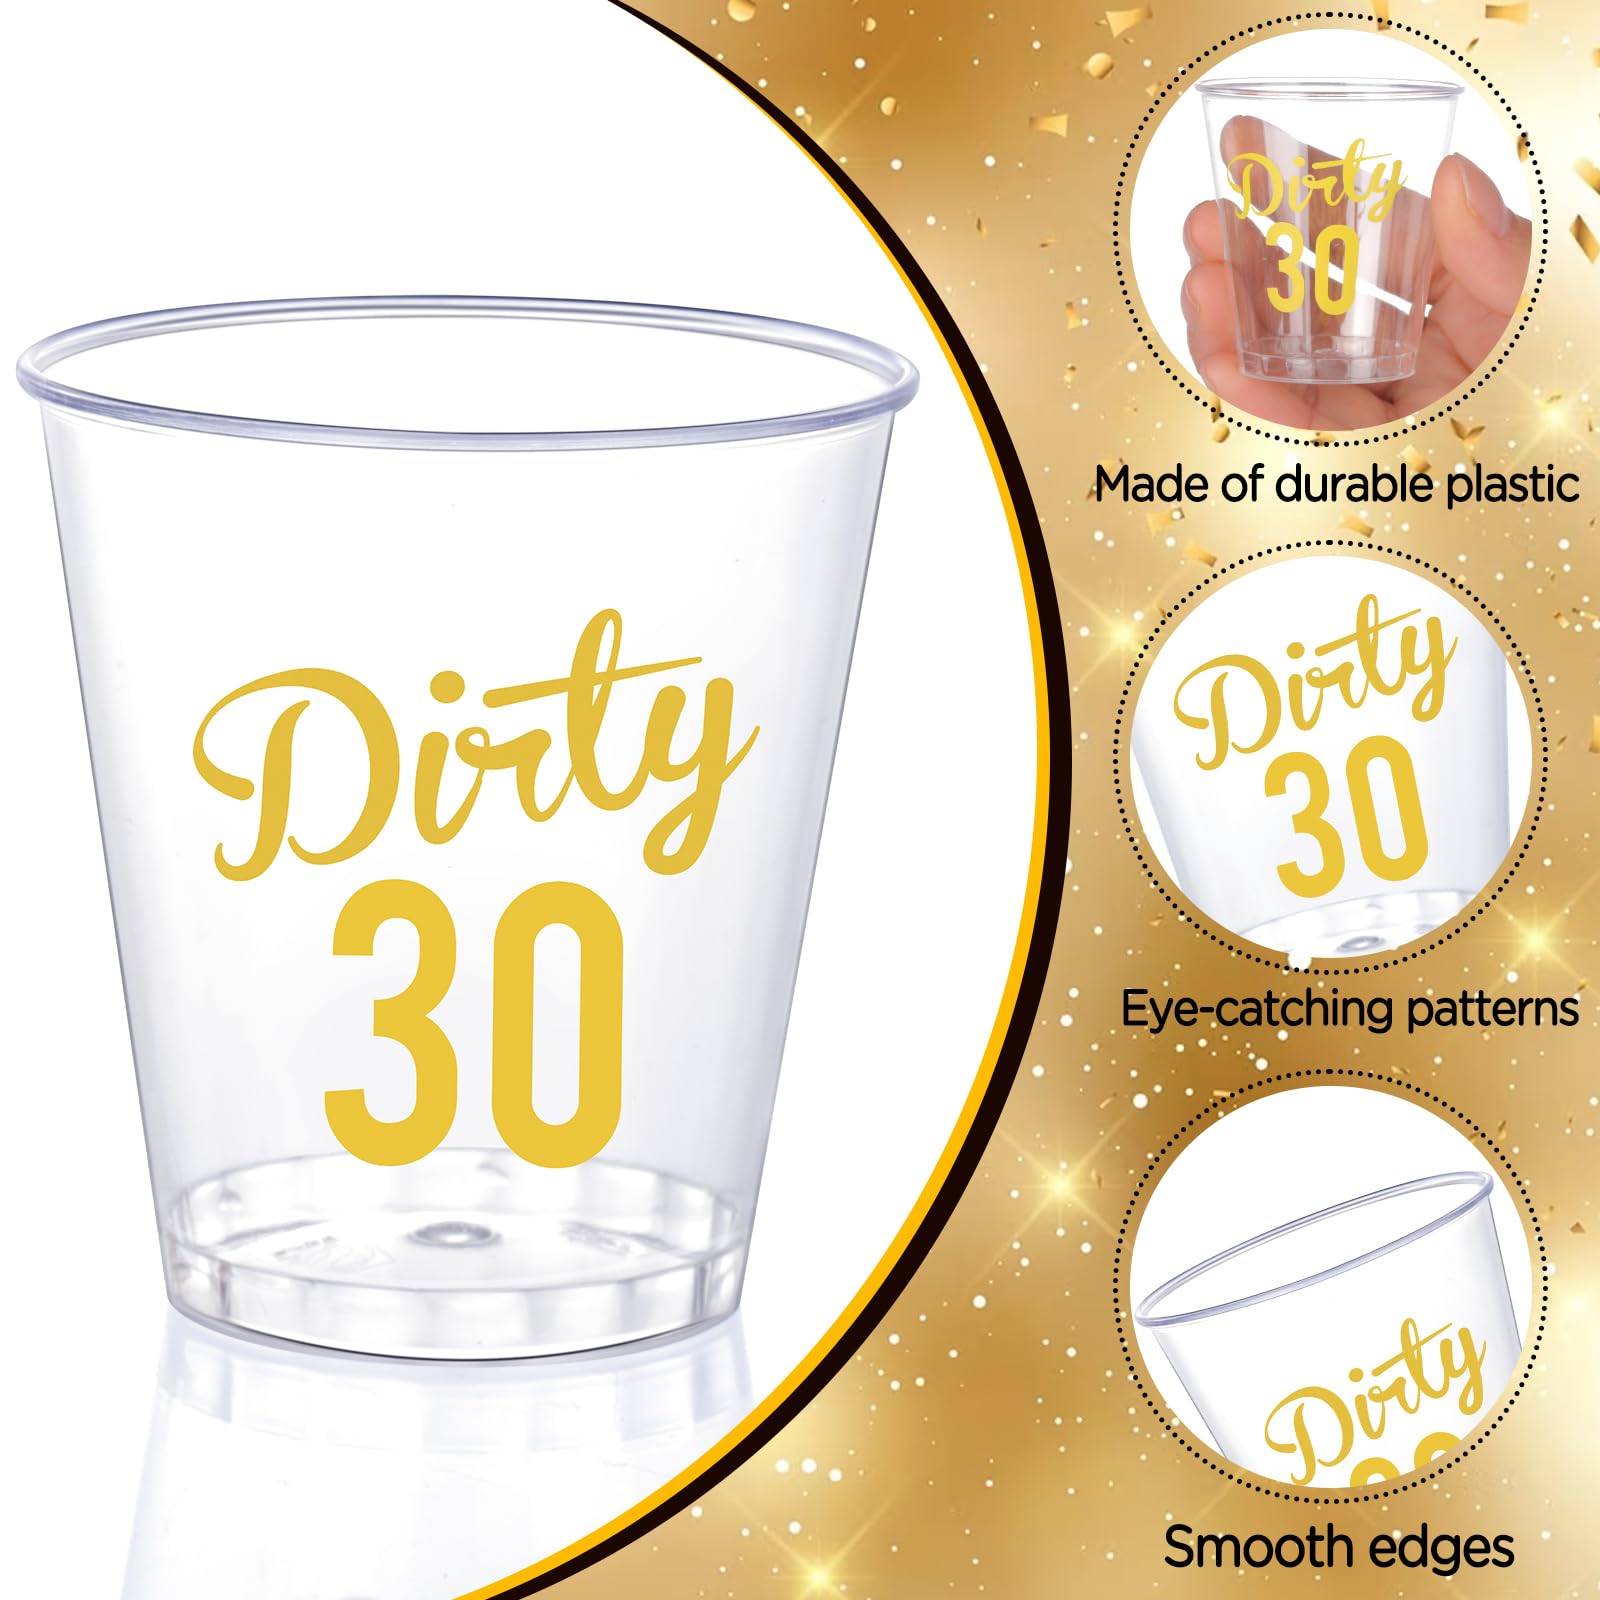 RUMIA 100 Pcs 30th Birthday Shot Glasses 30th Birthday Decorations for Men Women Dirty 30 Birthday Shot Glasses 2 oz Plastic Disposable Cups 30th Birthday Party Favors Gifts Anniversary Wedding Décor